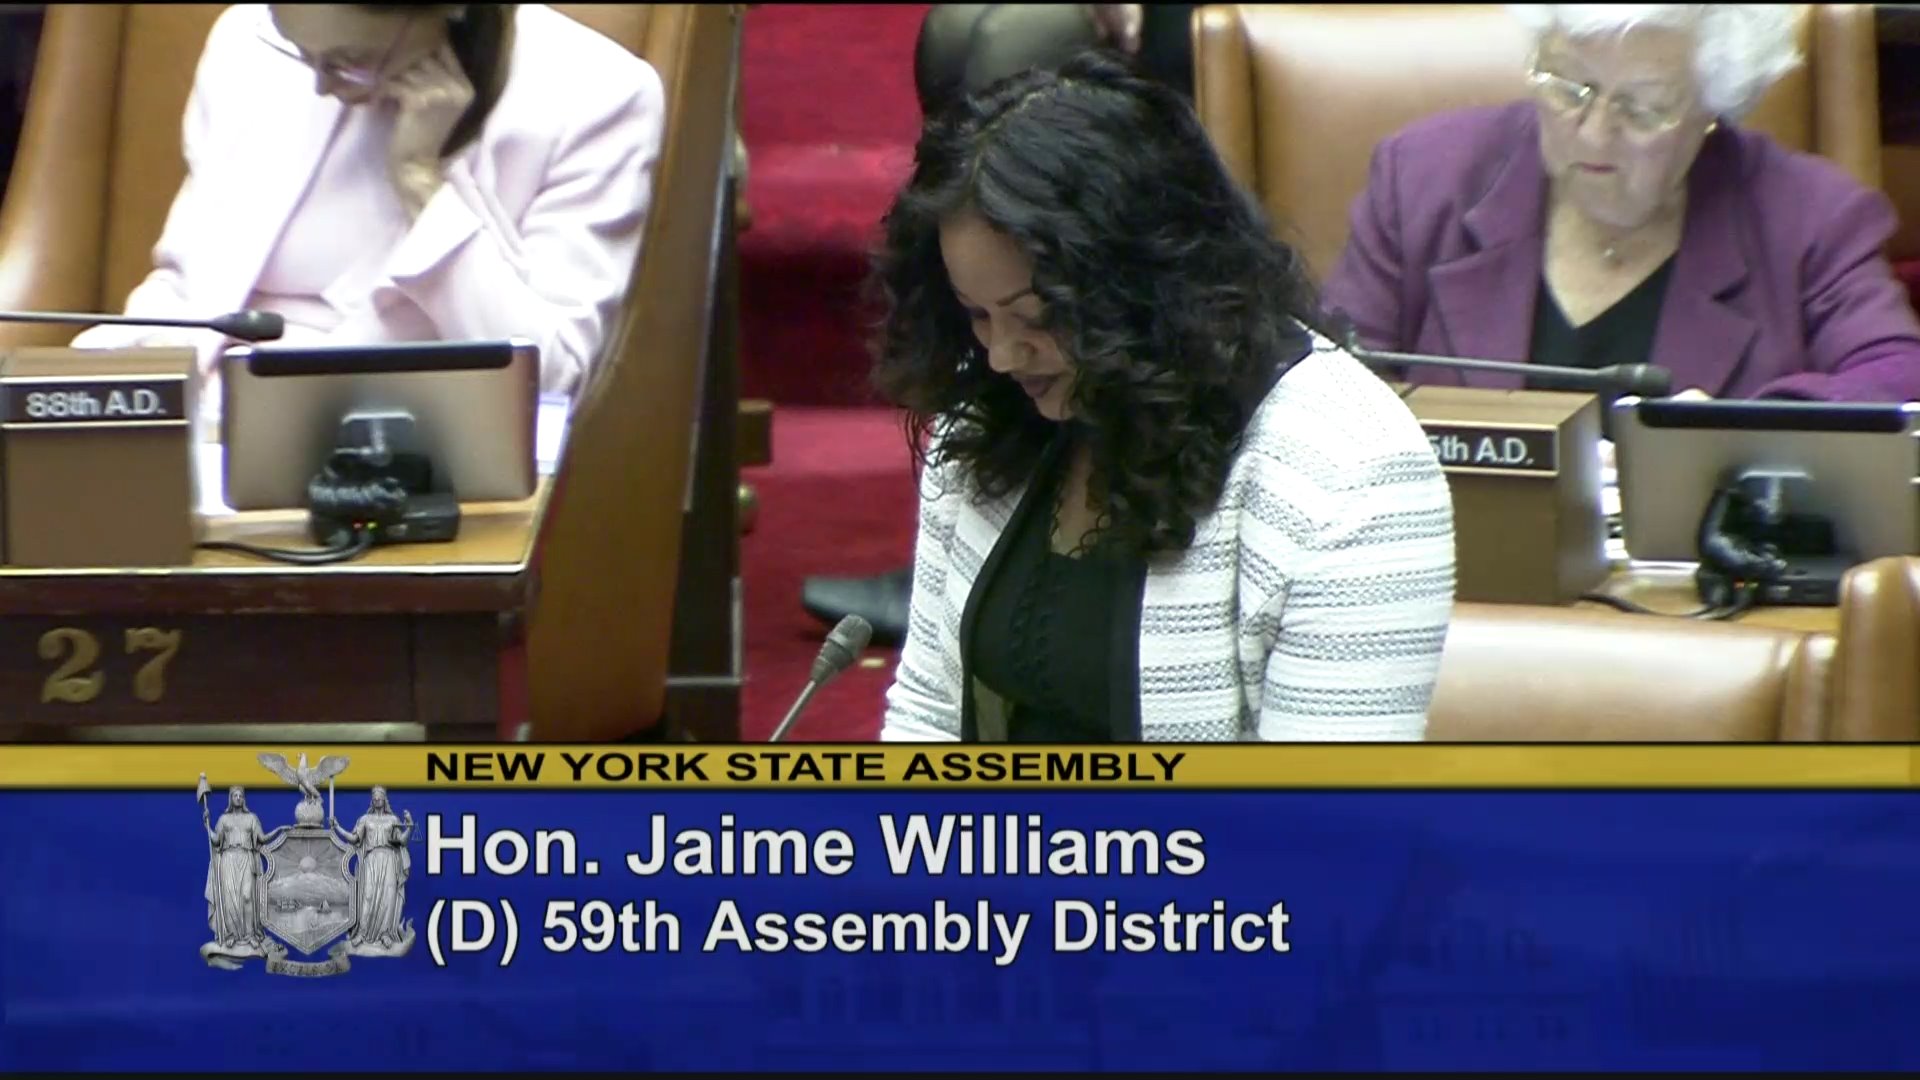 Welcoming Valerie Woodford to the Assembly